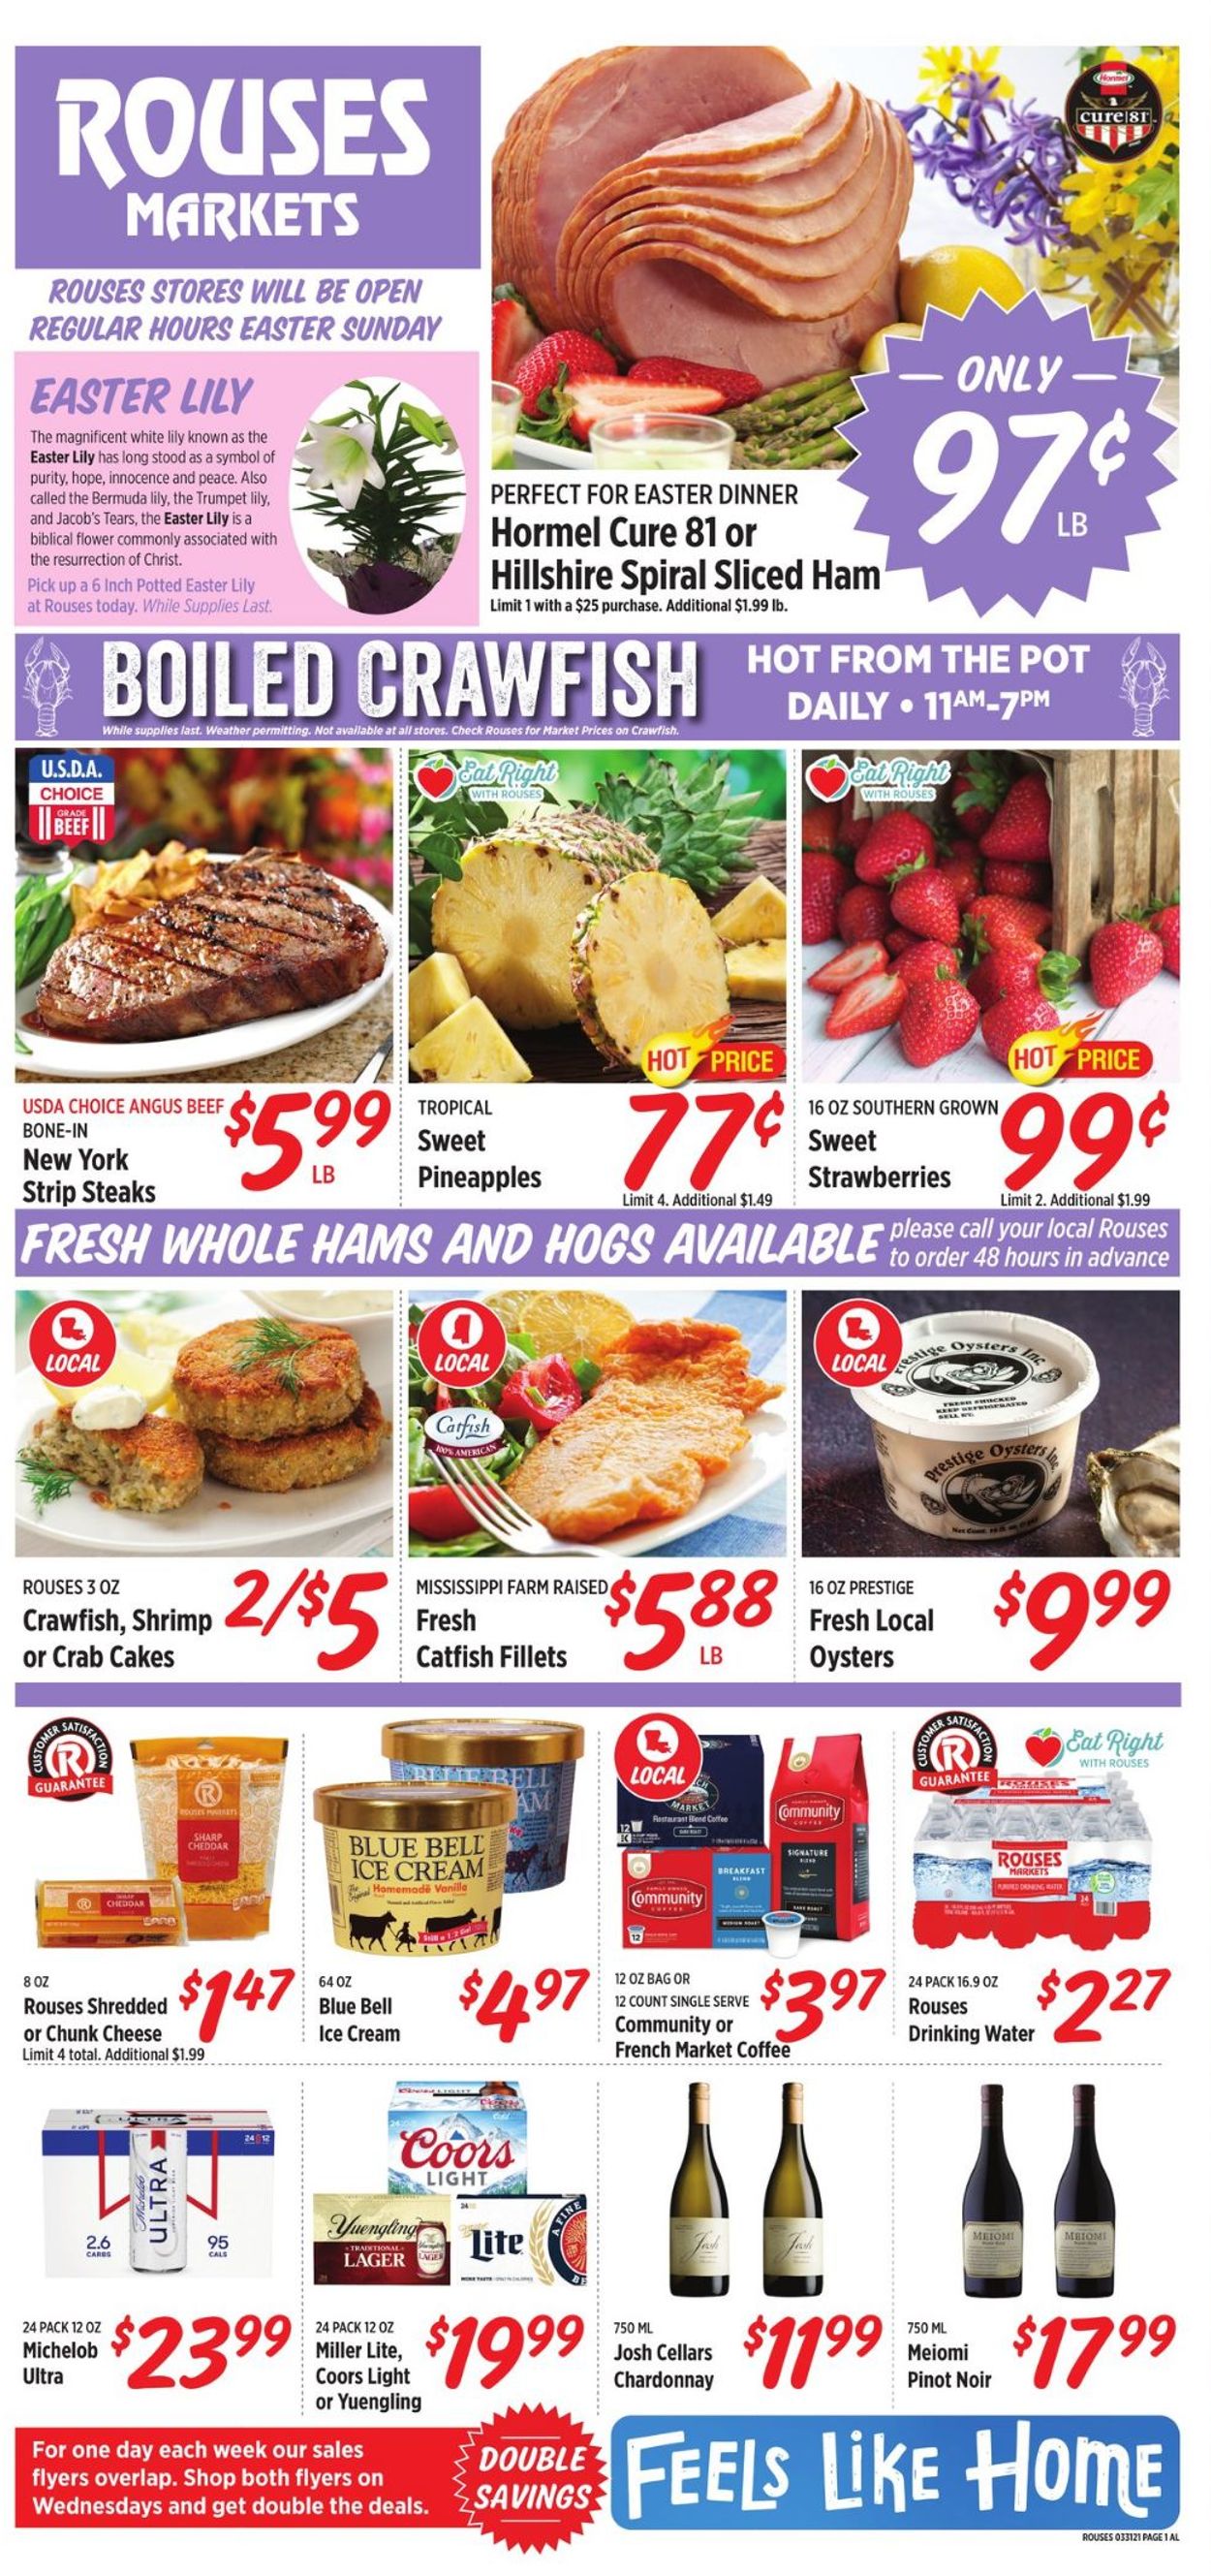 Rouses Easter 2021 ad Current weekly ad 03/31 04/07/2021 frequent